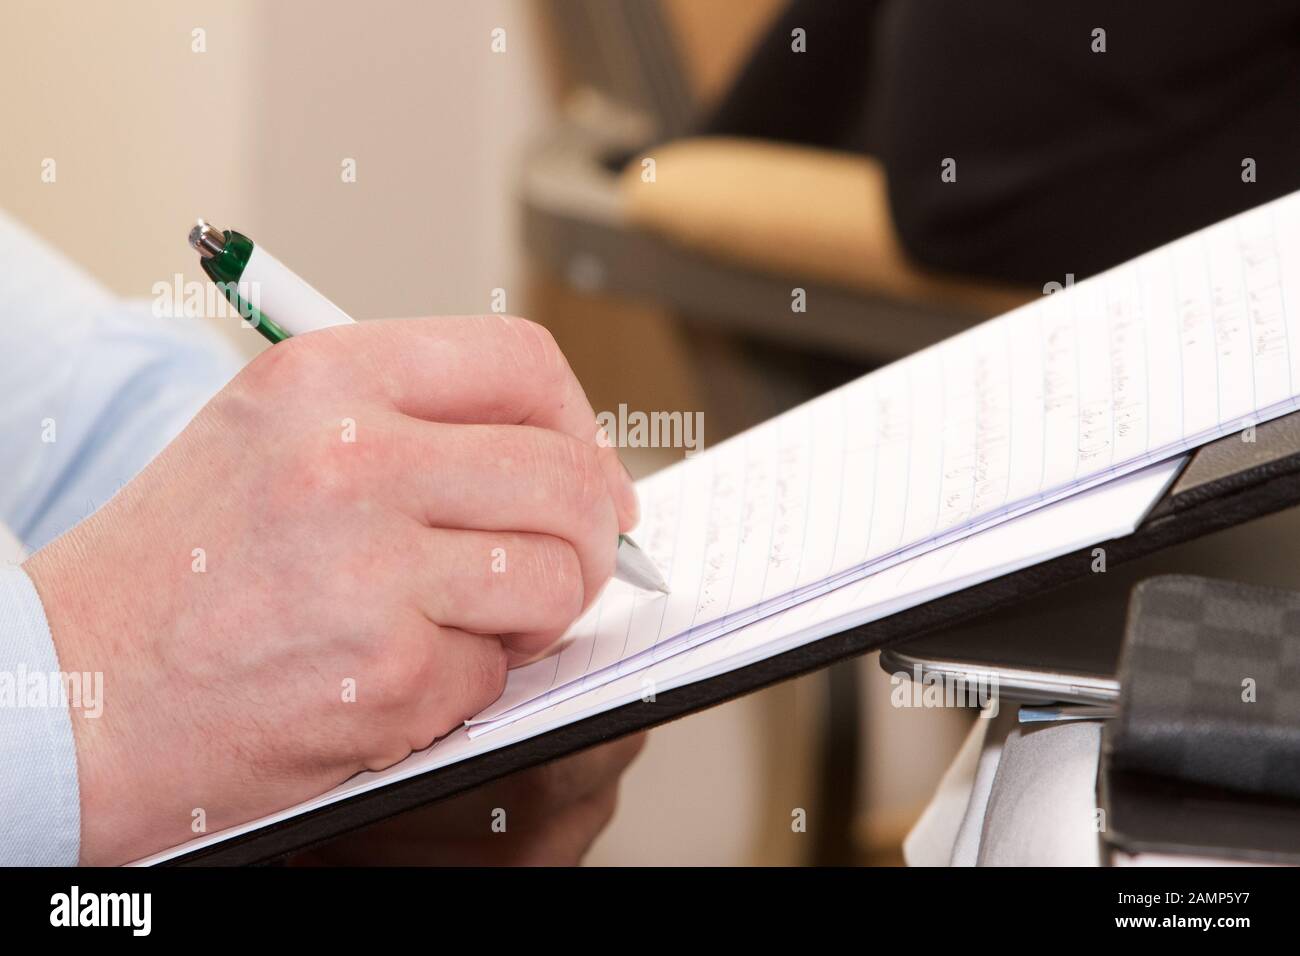 Taking notes at a business meeting or conference. Stock Photo